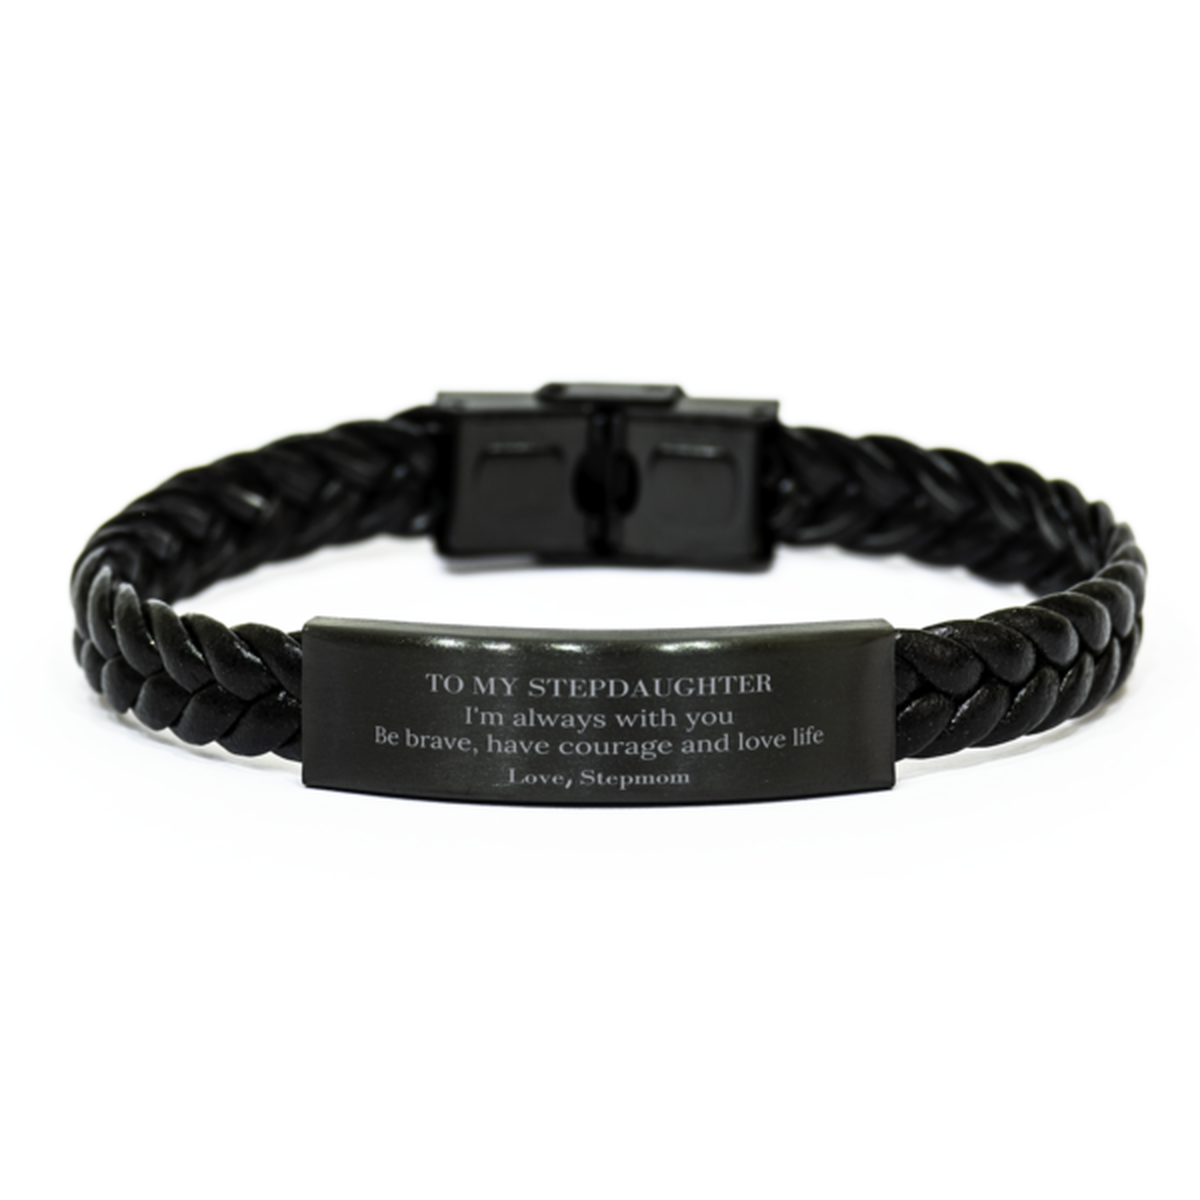 To My Stepdaughter Gifts from Stepmom, Unique Braided Leather Bracelet Inspirational Christmas Birthday Graduation Gifts for Stepdaughter I'm always with you. Be brave, have courage and love life. Love, Stepmom